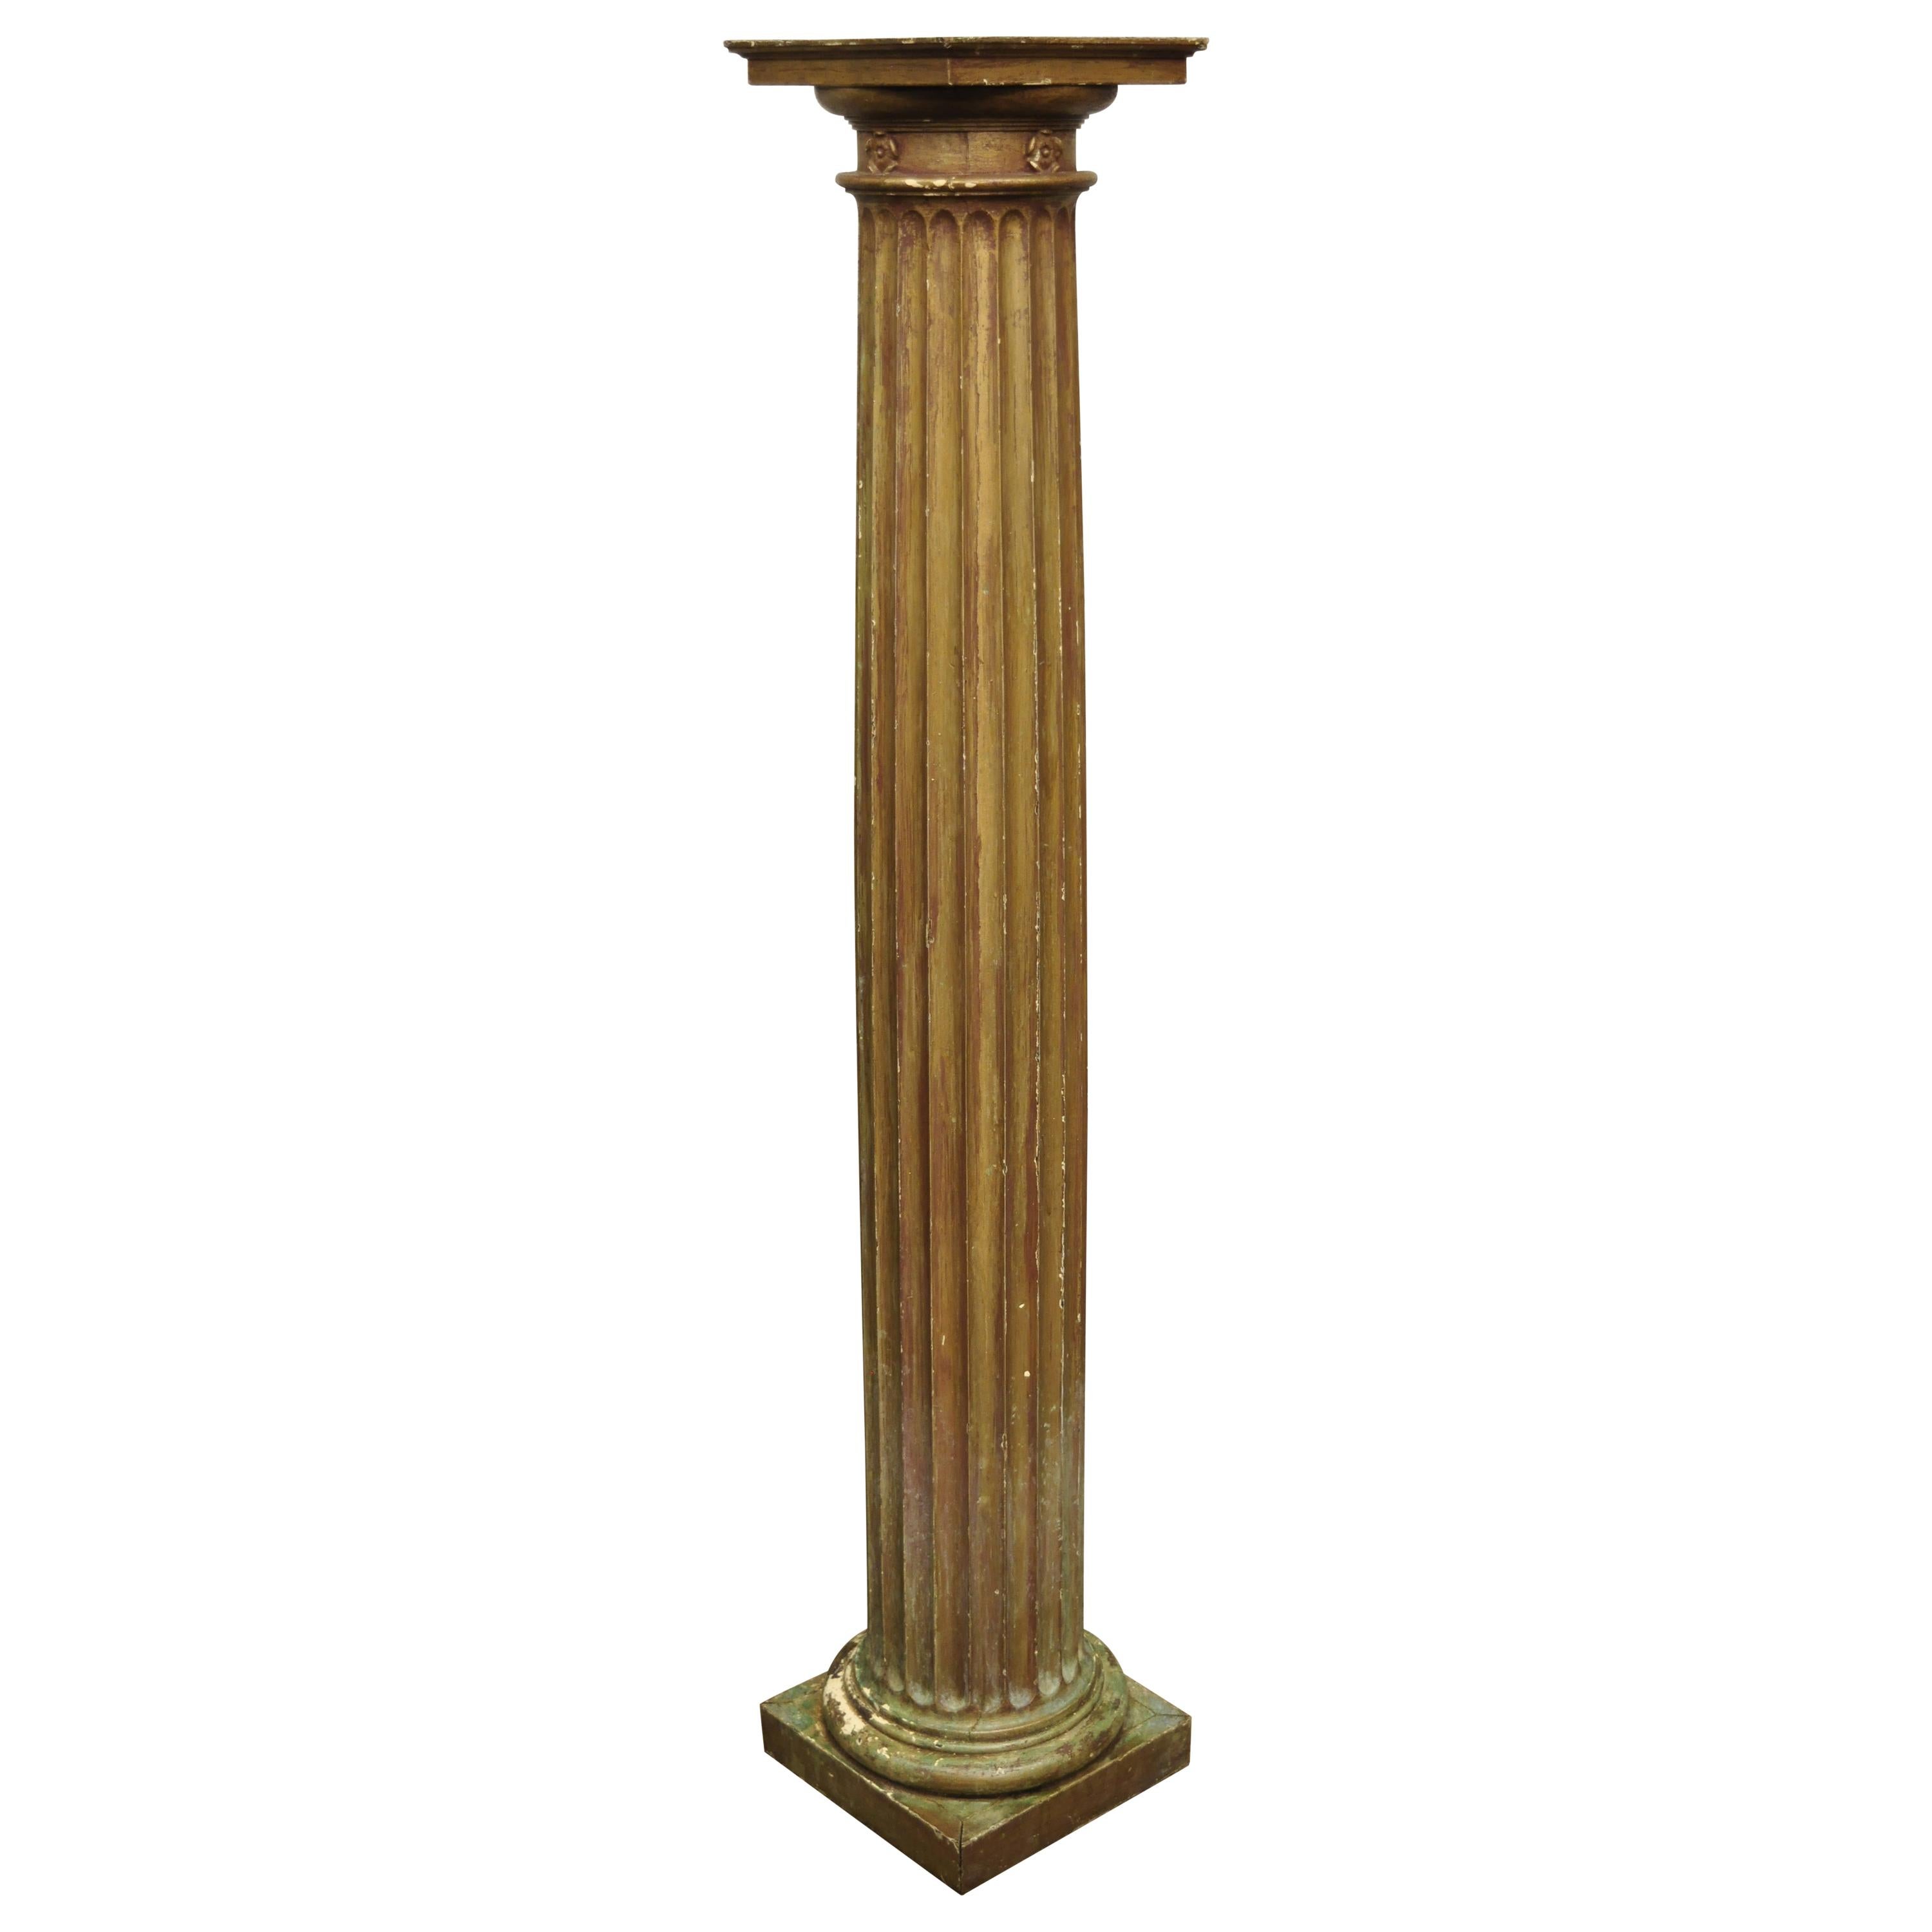 Antique Italian Classical Carved Wood Column Distressed Gold Pedestal